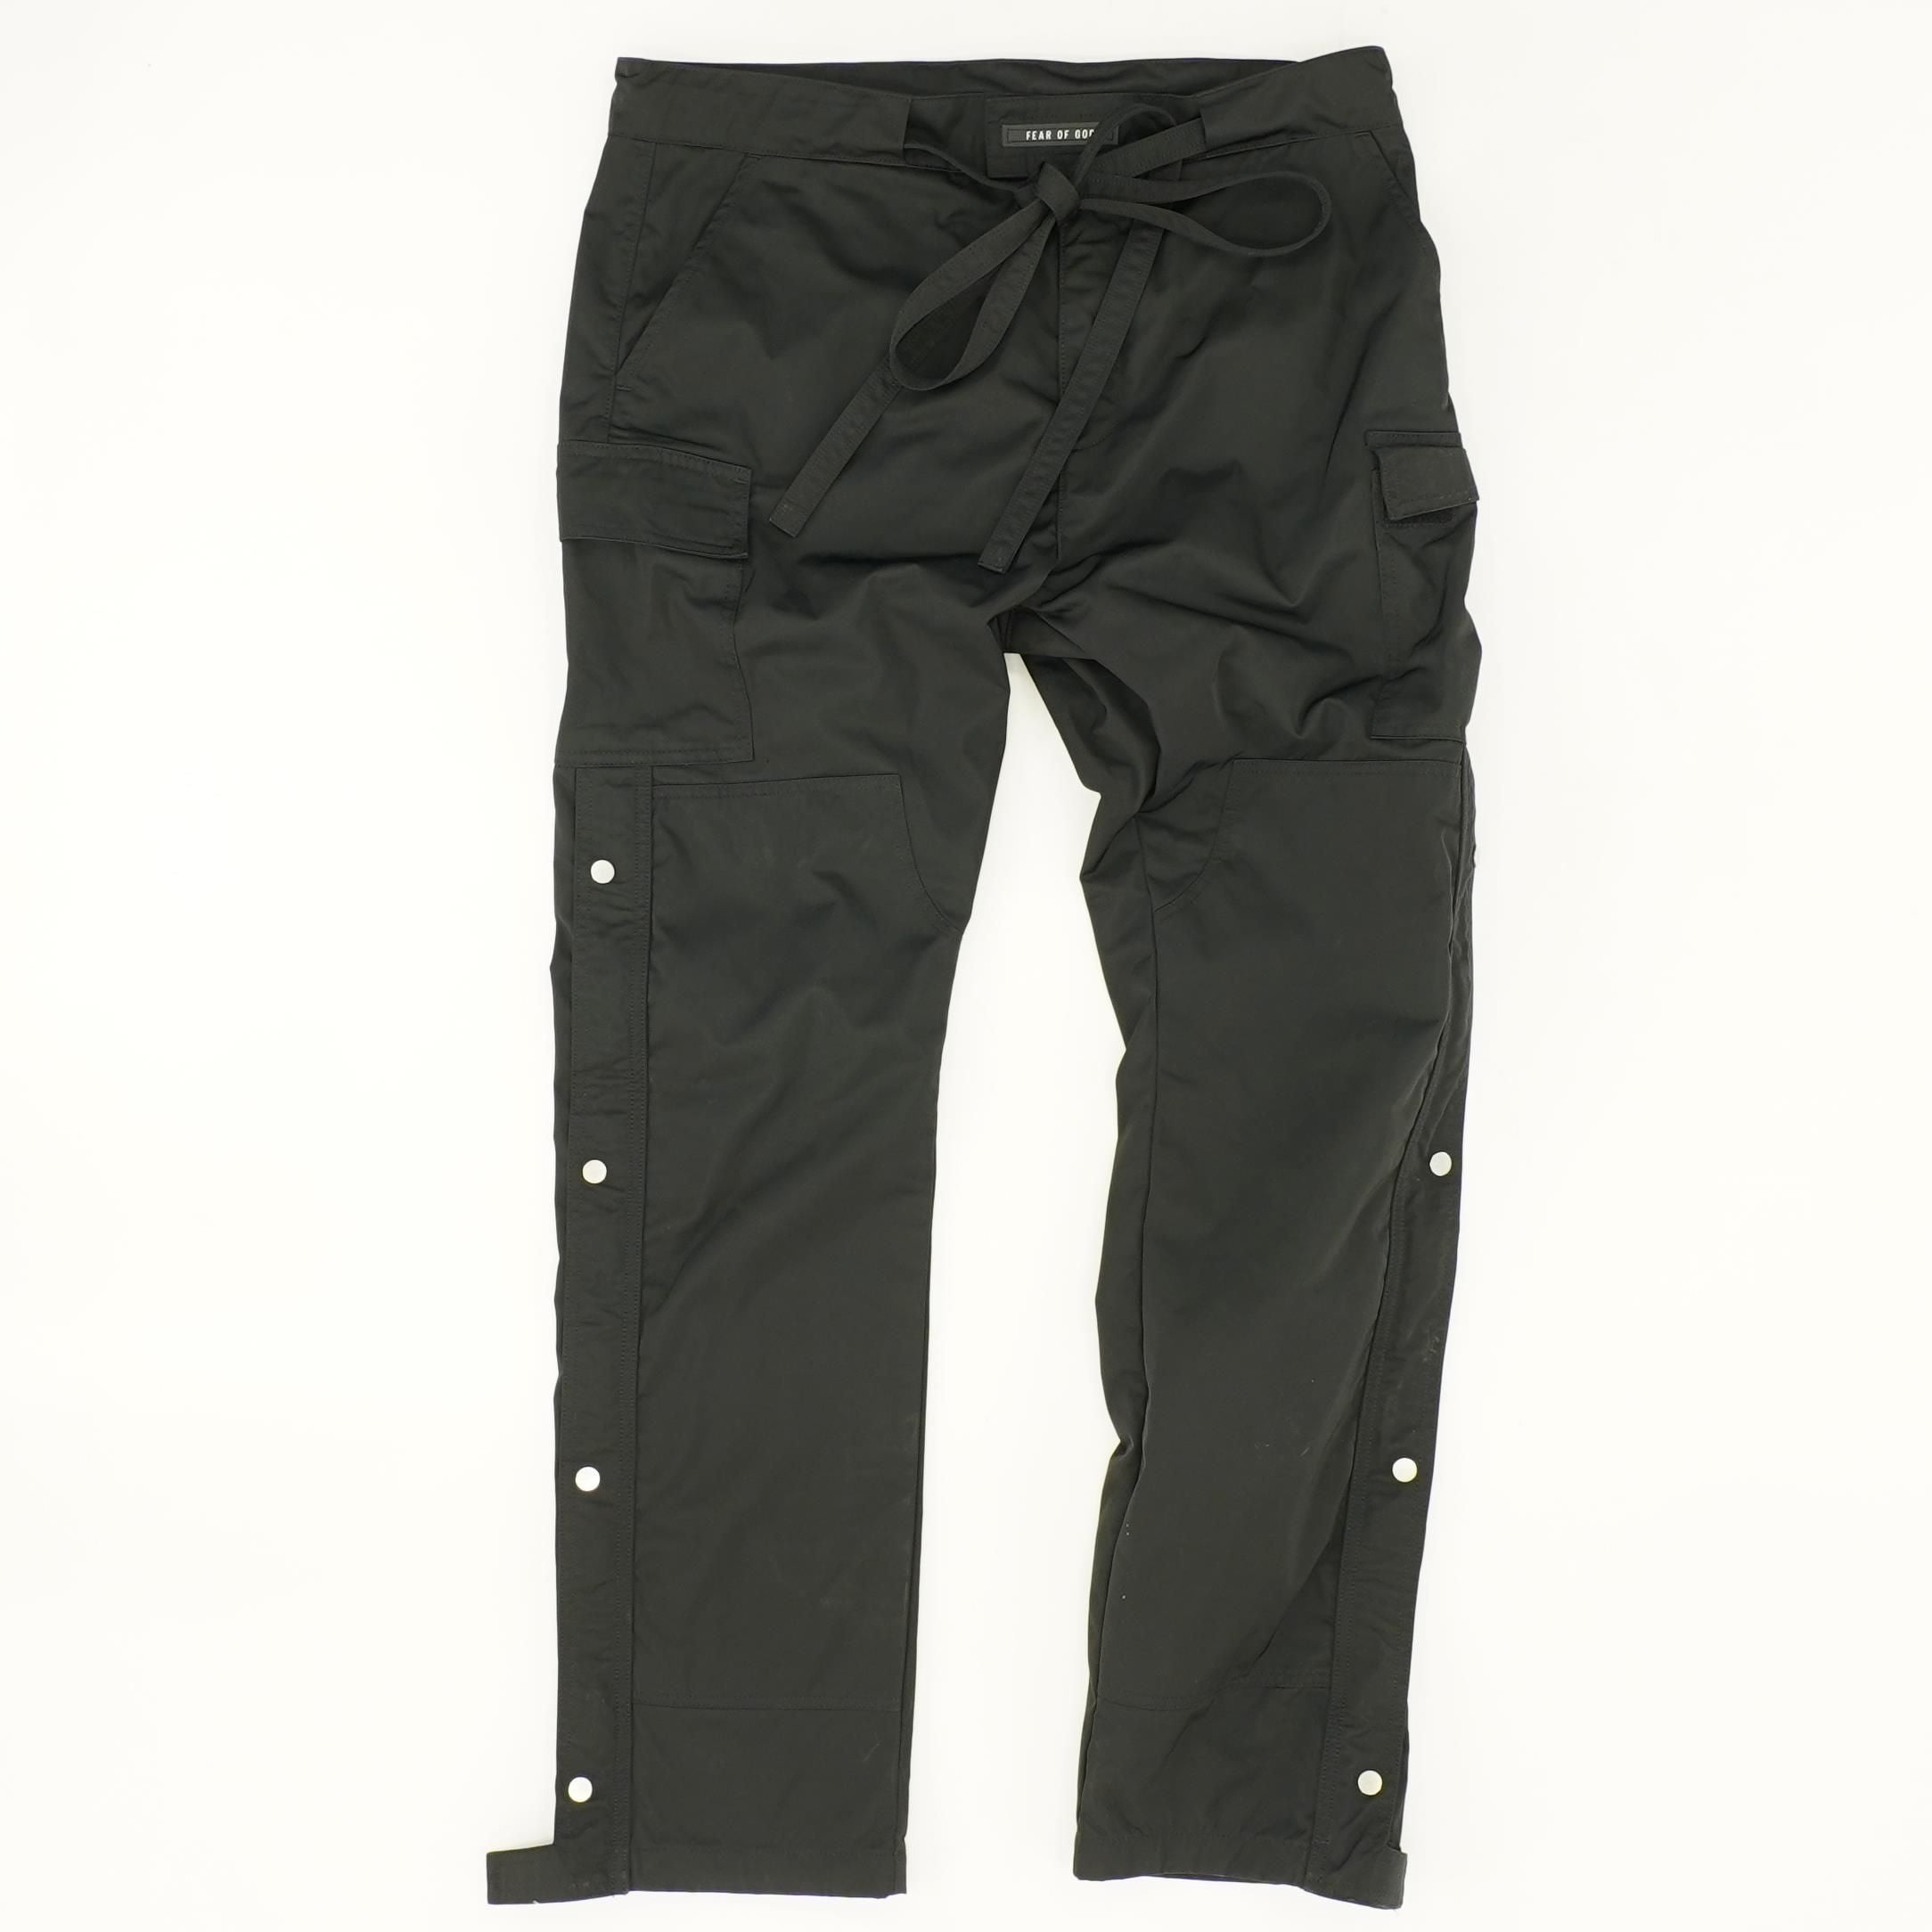 Black Solid Nylon Cargo Snap Pants – Unclaimed Baggage